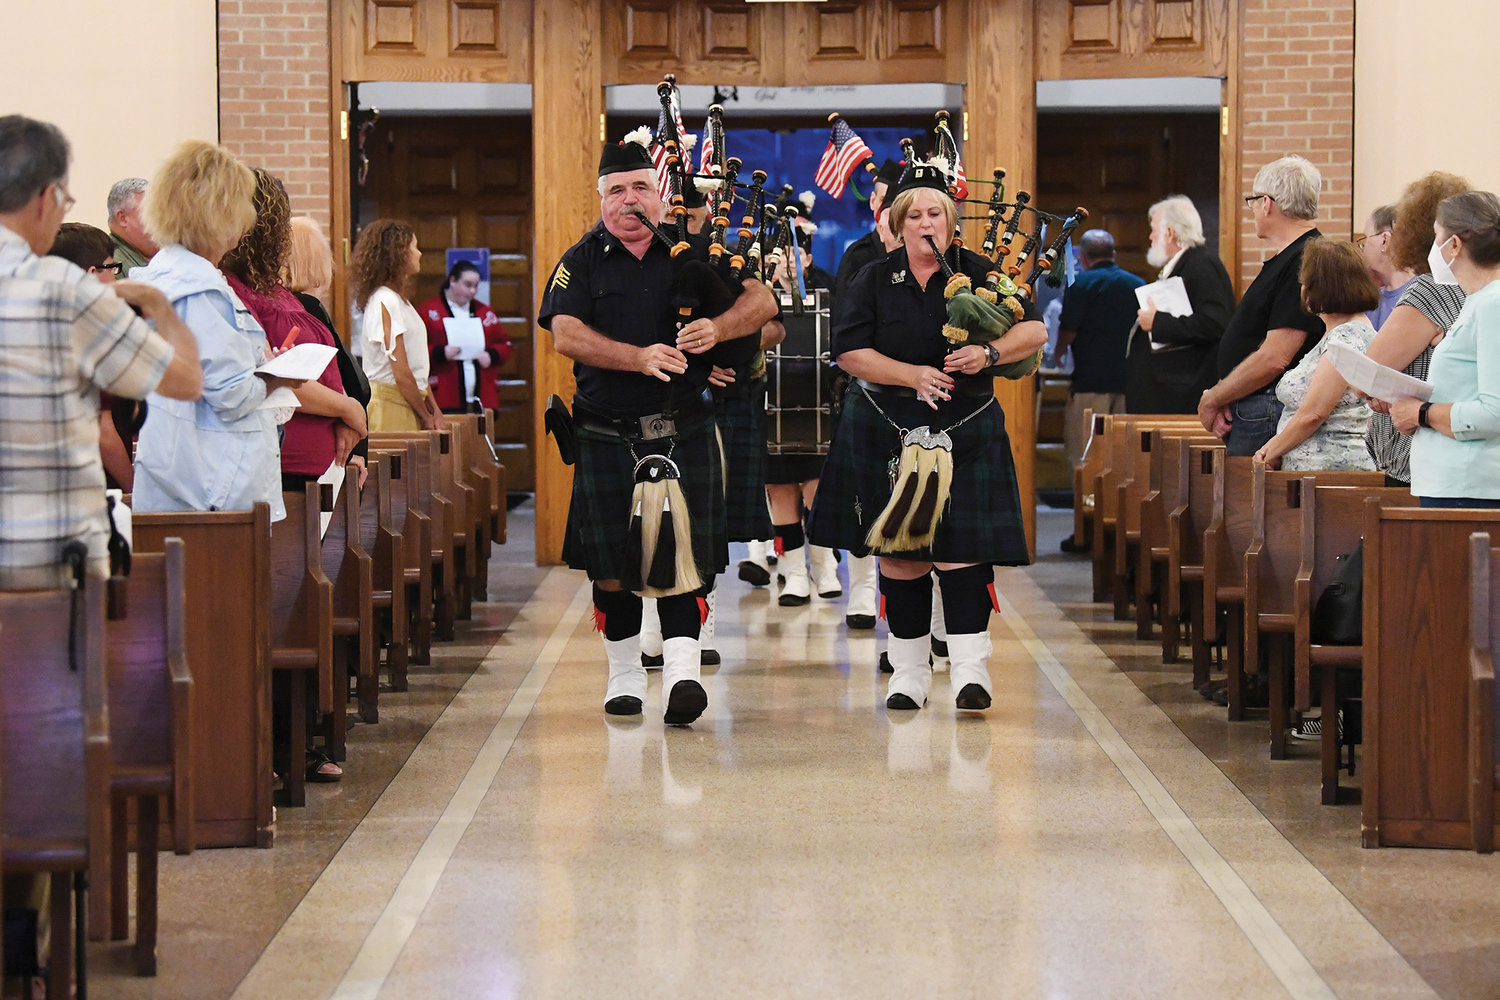 Staten Island Pipers Pipes and Drums lead the procession into Our Lady of Pity.